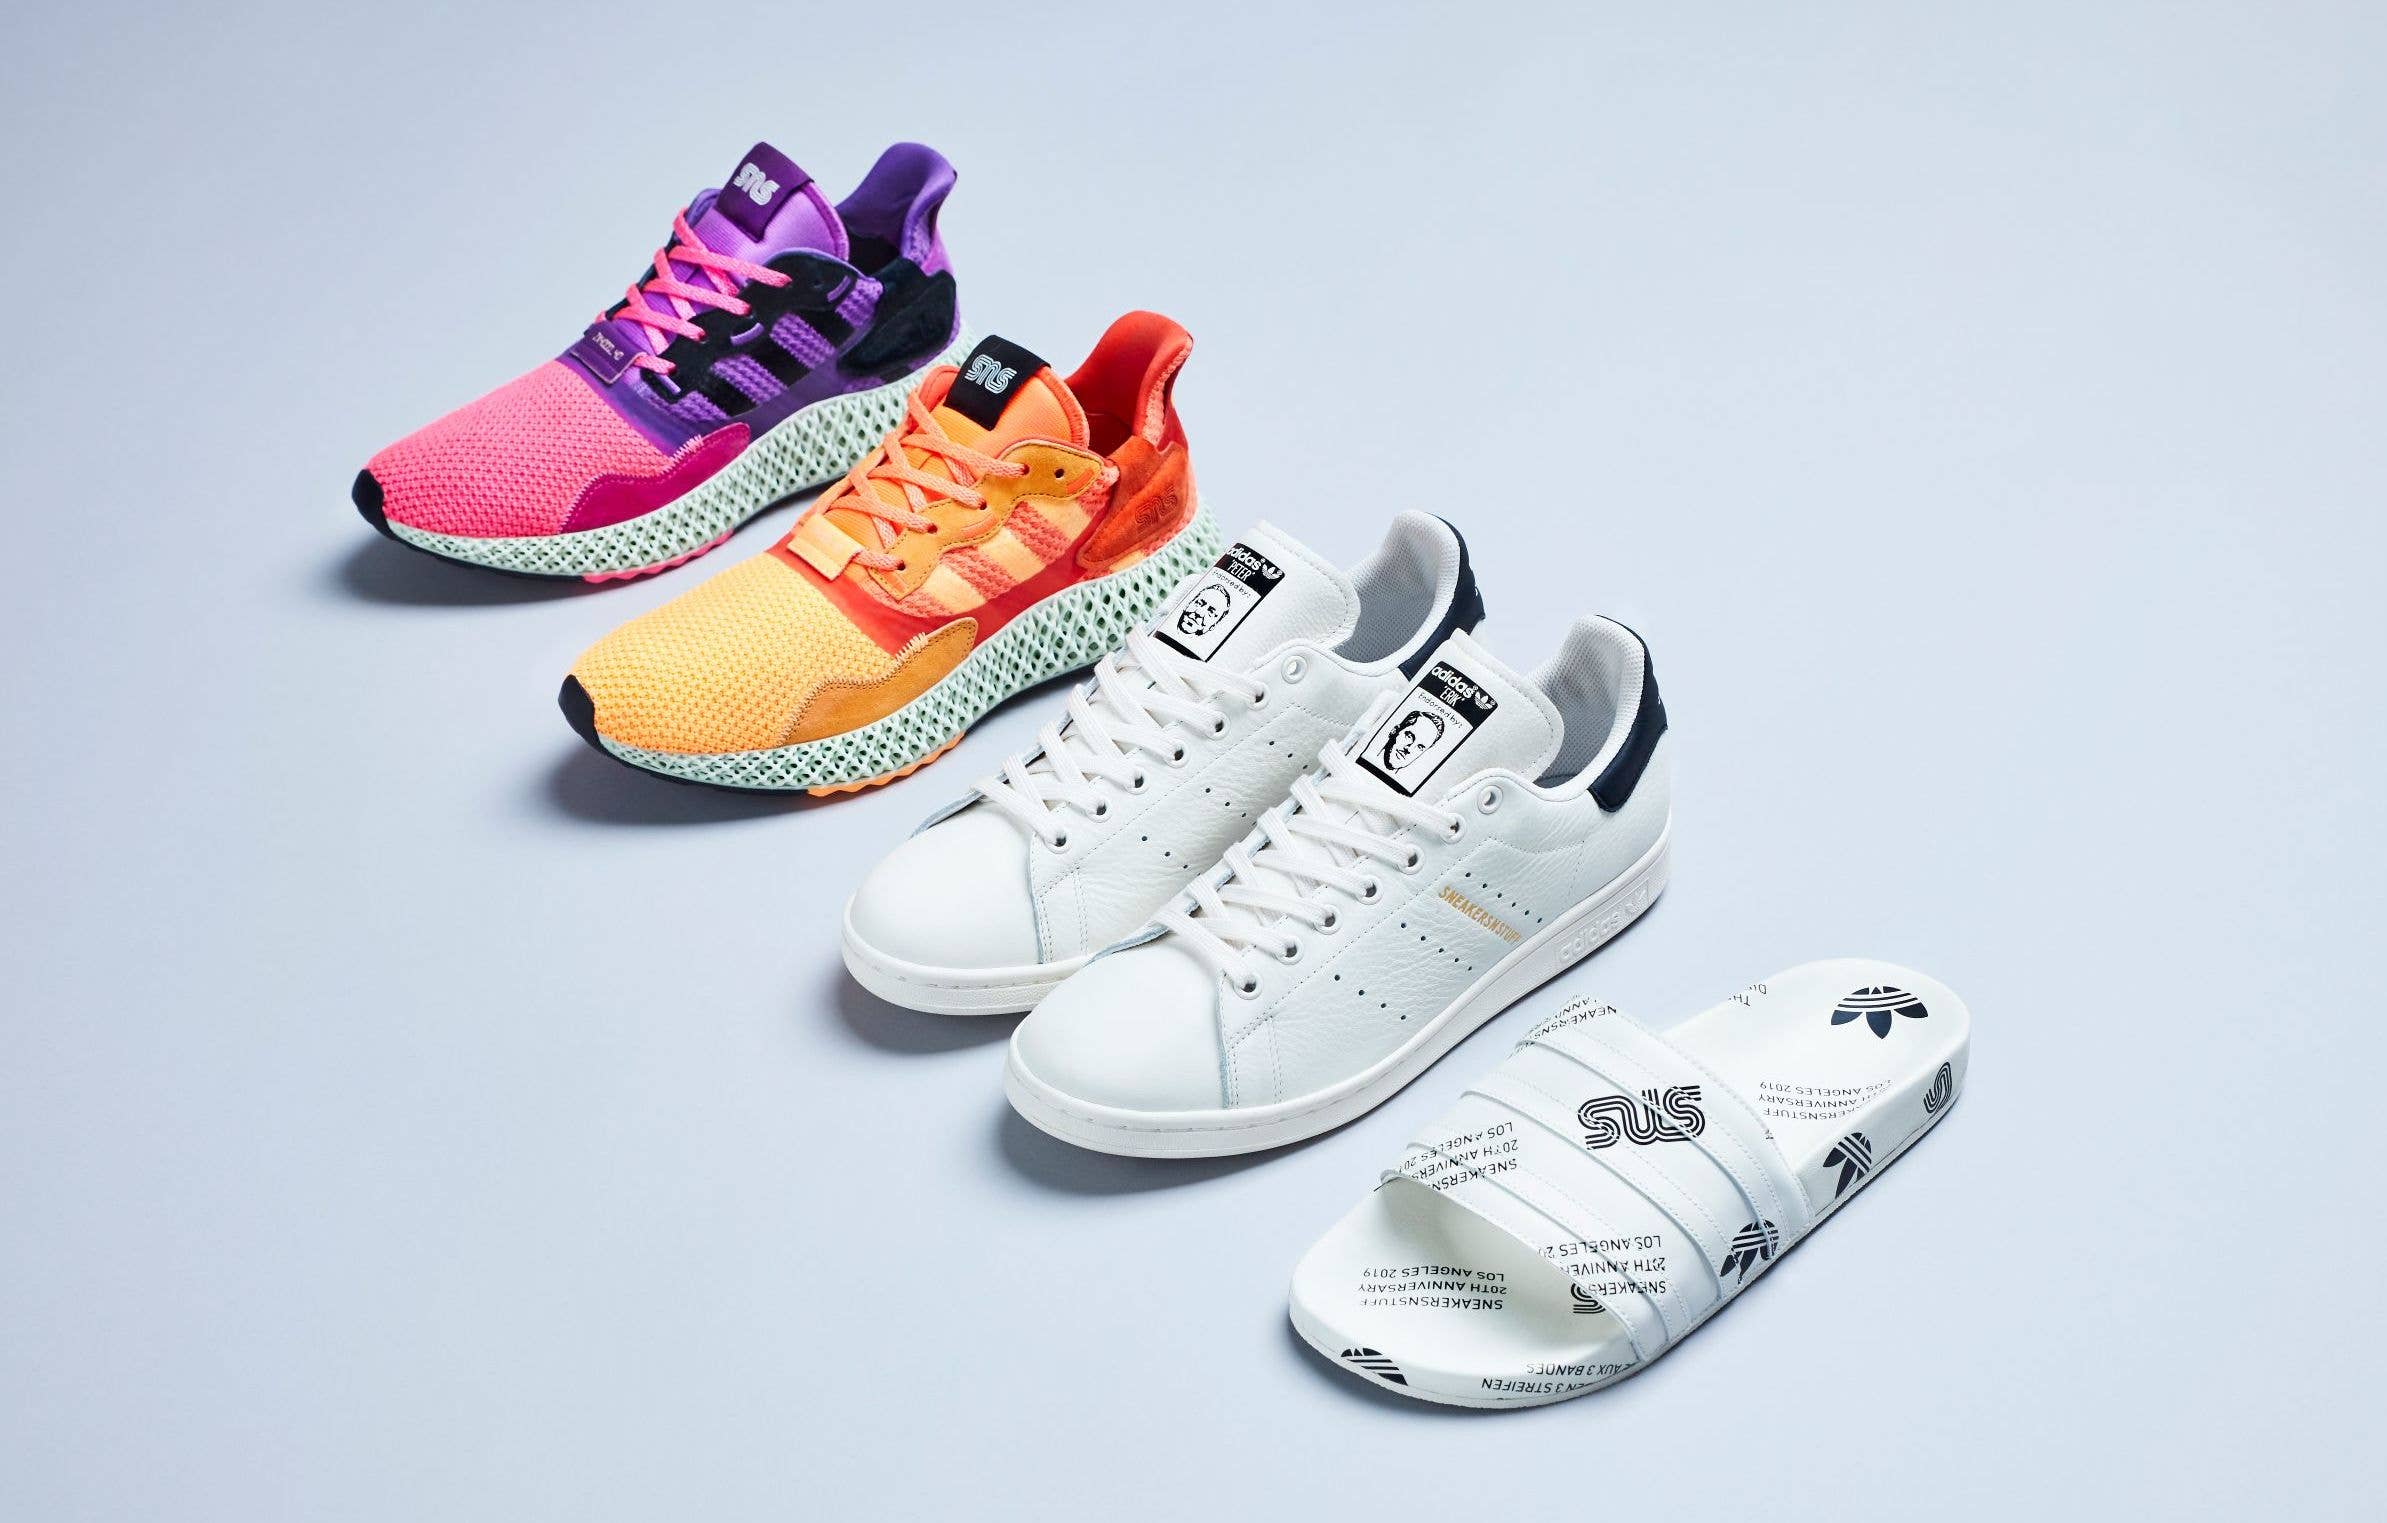 Sneakersnstuff x Adidas Consortium 20th Anniversary Collection